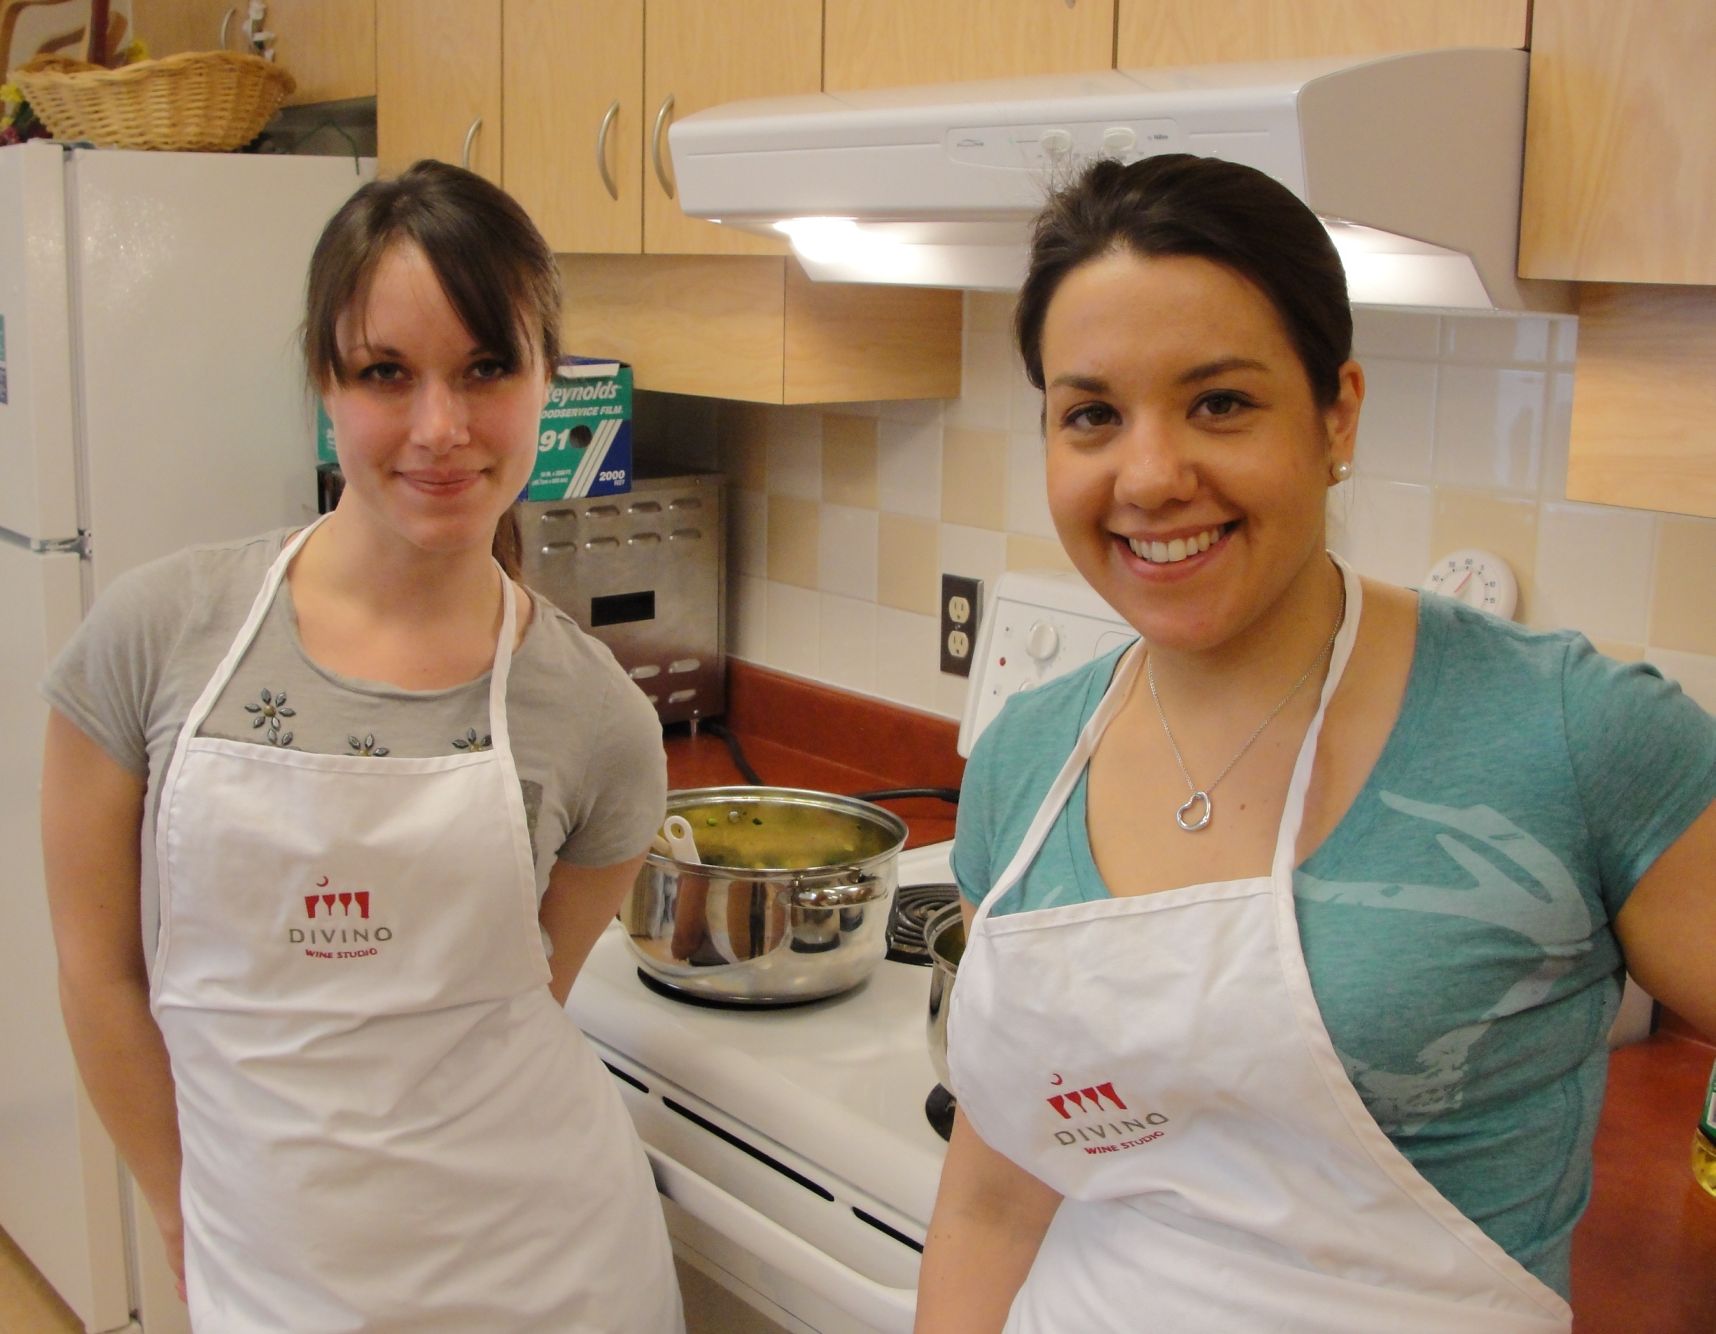 http://www.youvillecentre.org/wp-content/uploads/2020/12/Collective-Kitchen-Larissa-and-Jessica-DiVino-March-9-018.jpg